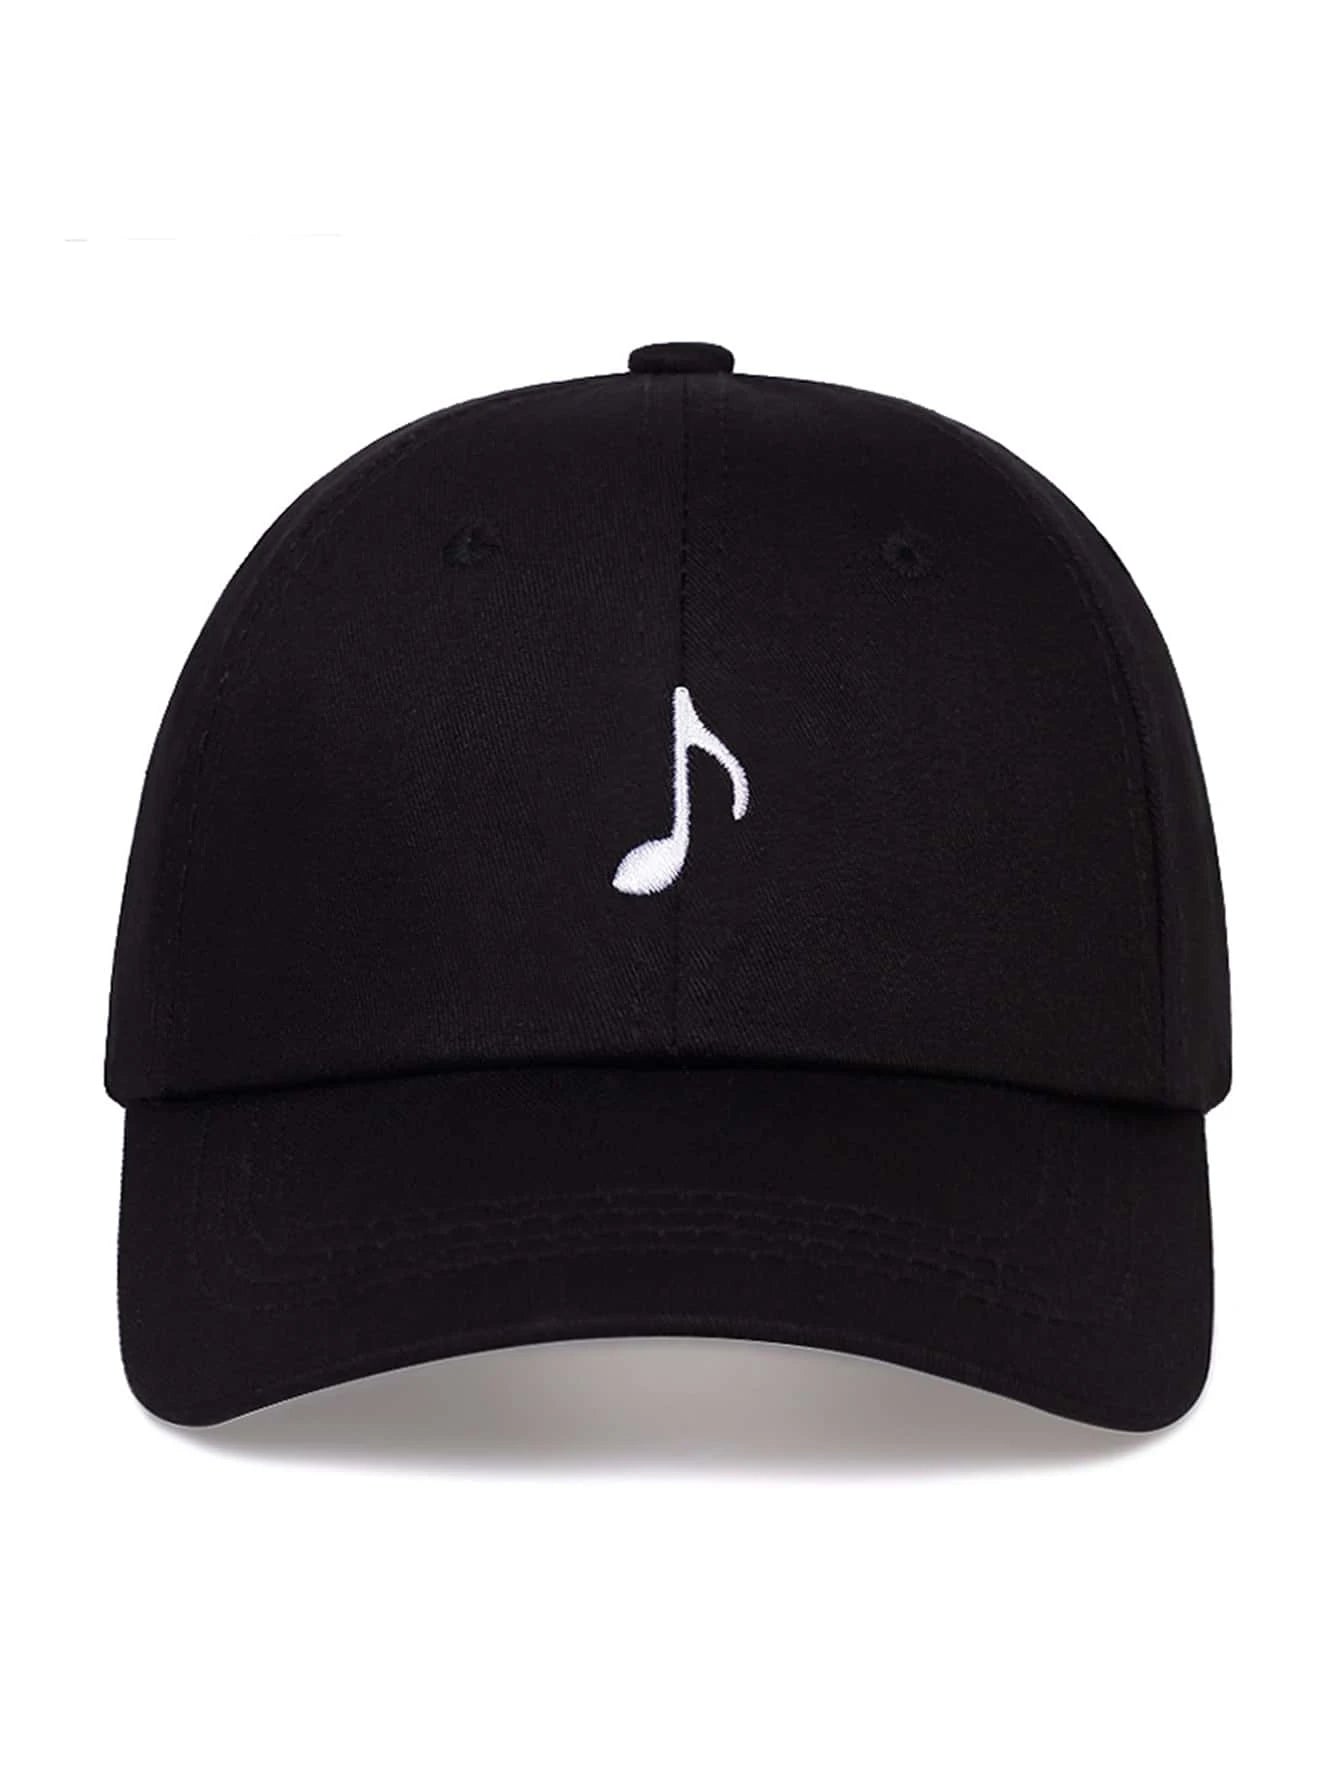 Men Music Note Embroidered Baseball Cap